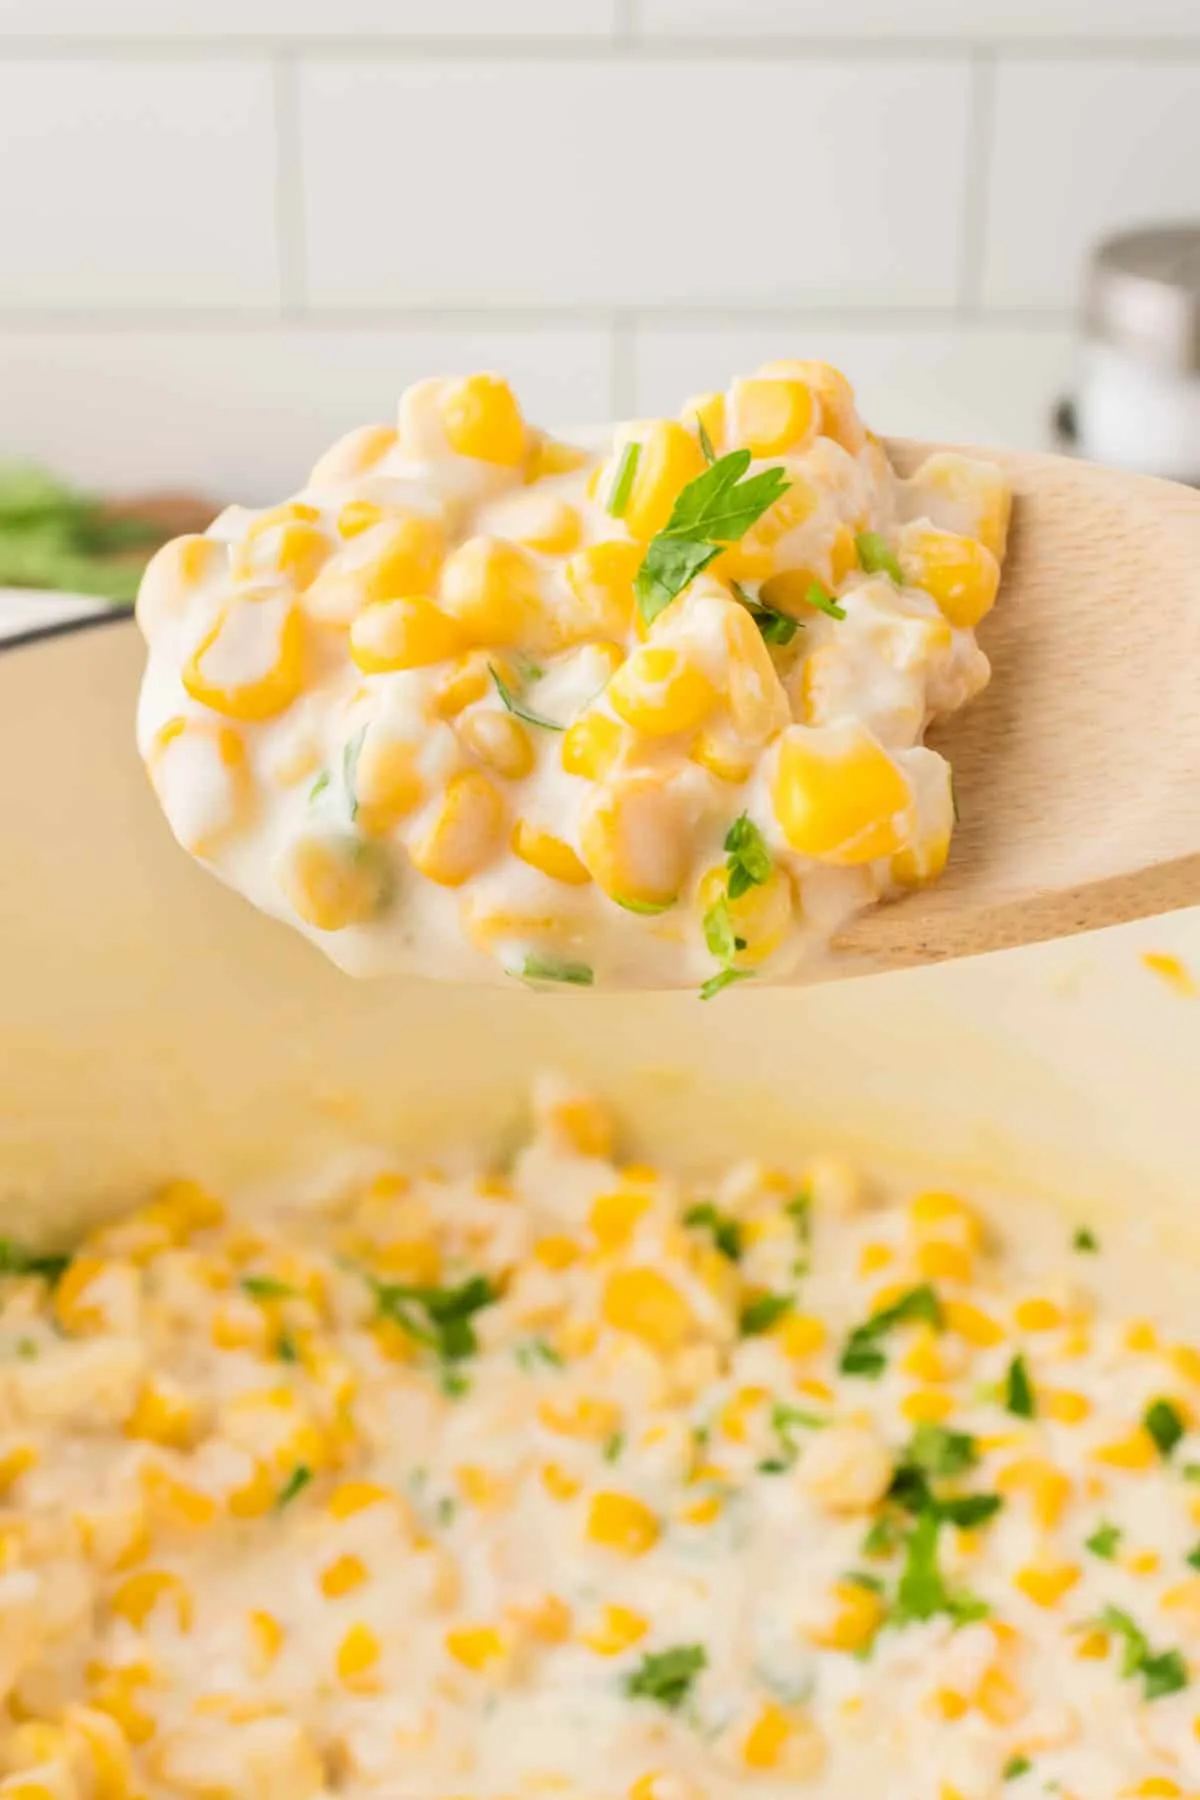 Creamed Corn with Cream Cheese is a rich and flavourful side dish recipe perfect for holiday dinners.